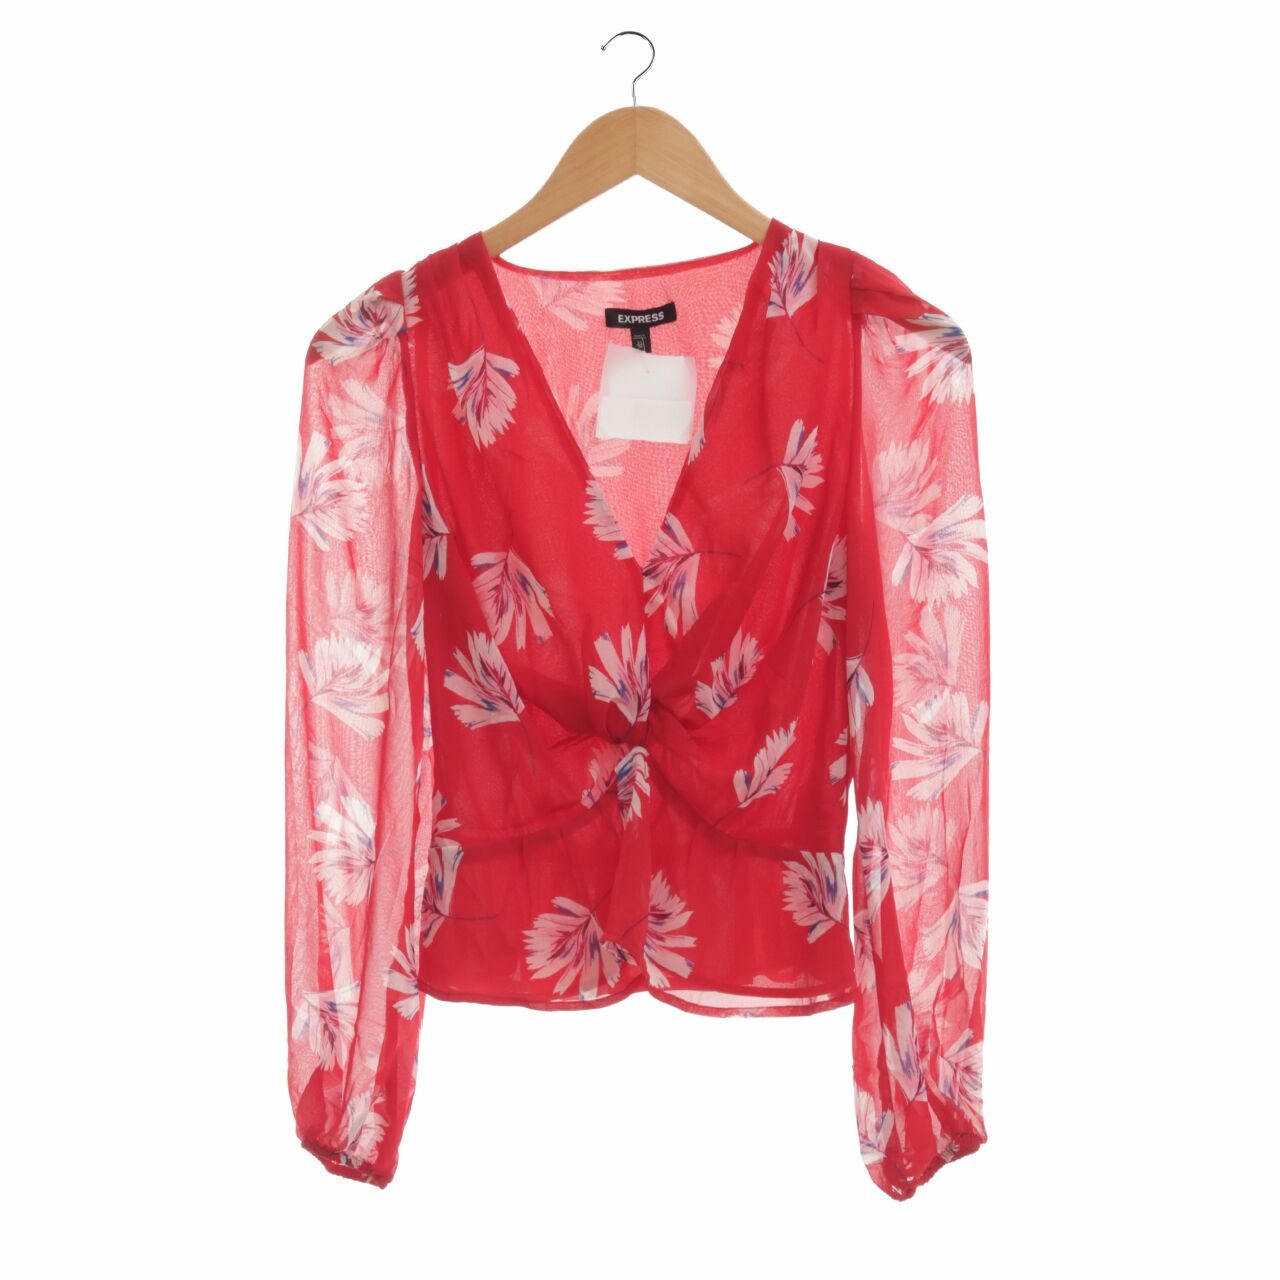 Express Red Floral Blouse